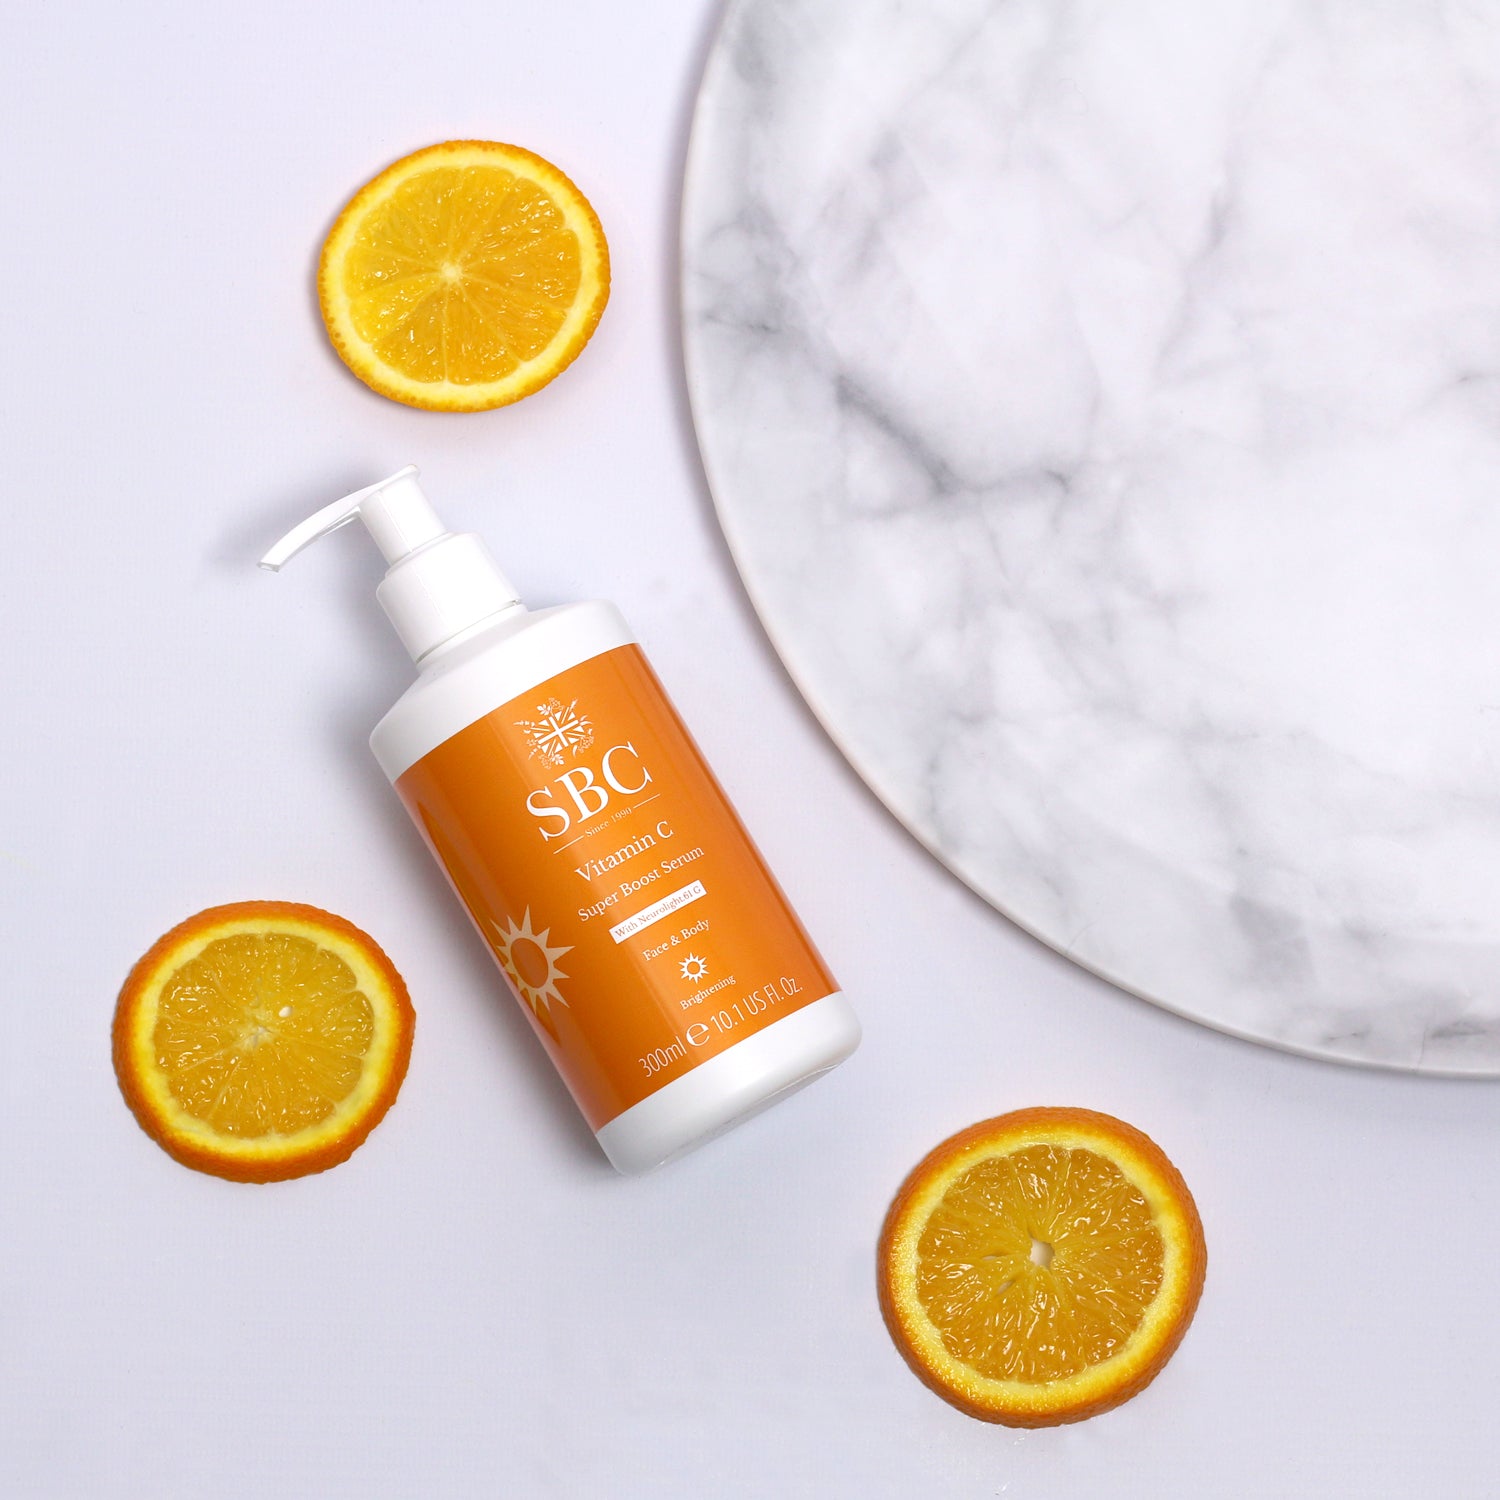 Vitamin C Super Boost Serum with a marble plate and slices of oranges